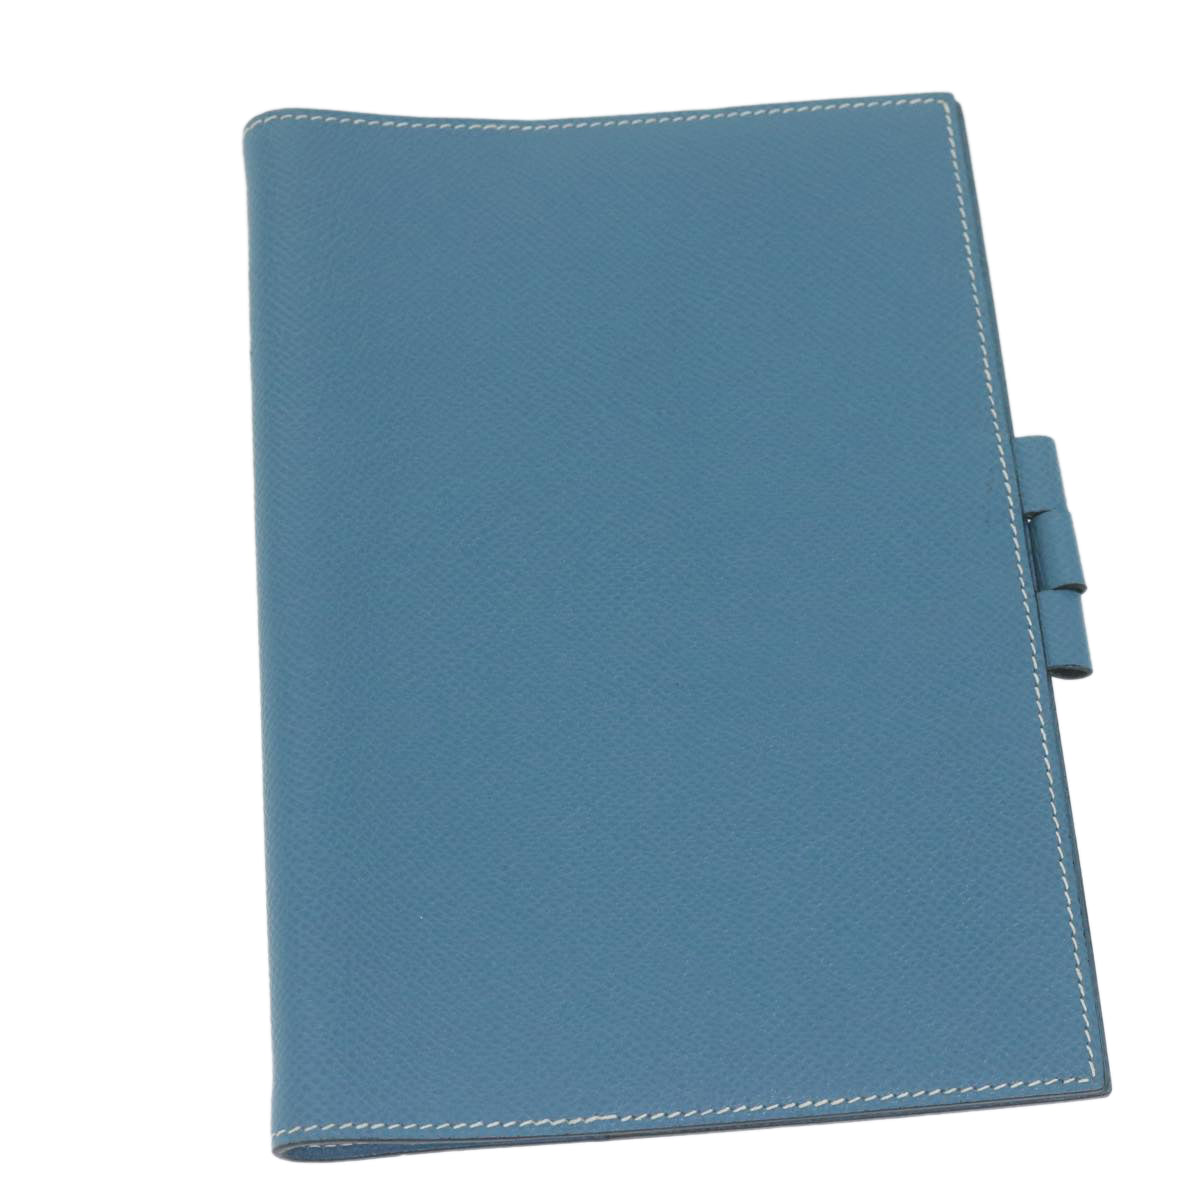 HERMES agenda Day Planner Cover Leather Blue Auth ar11141